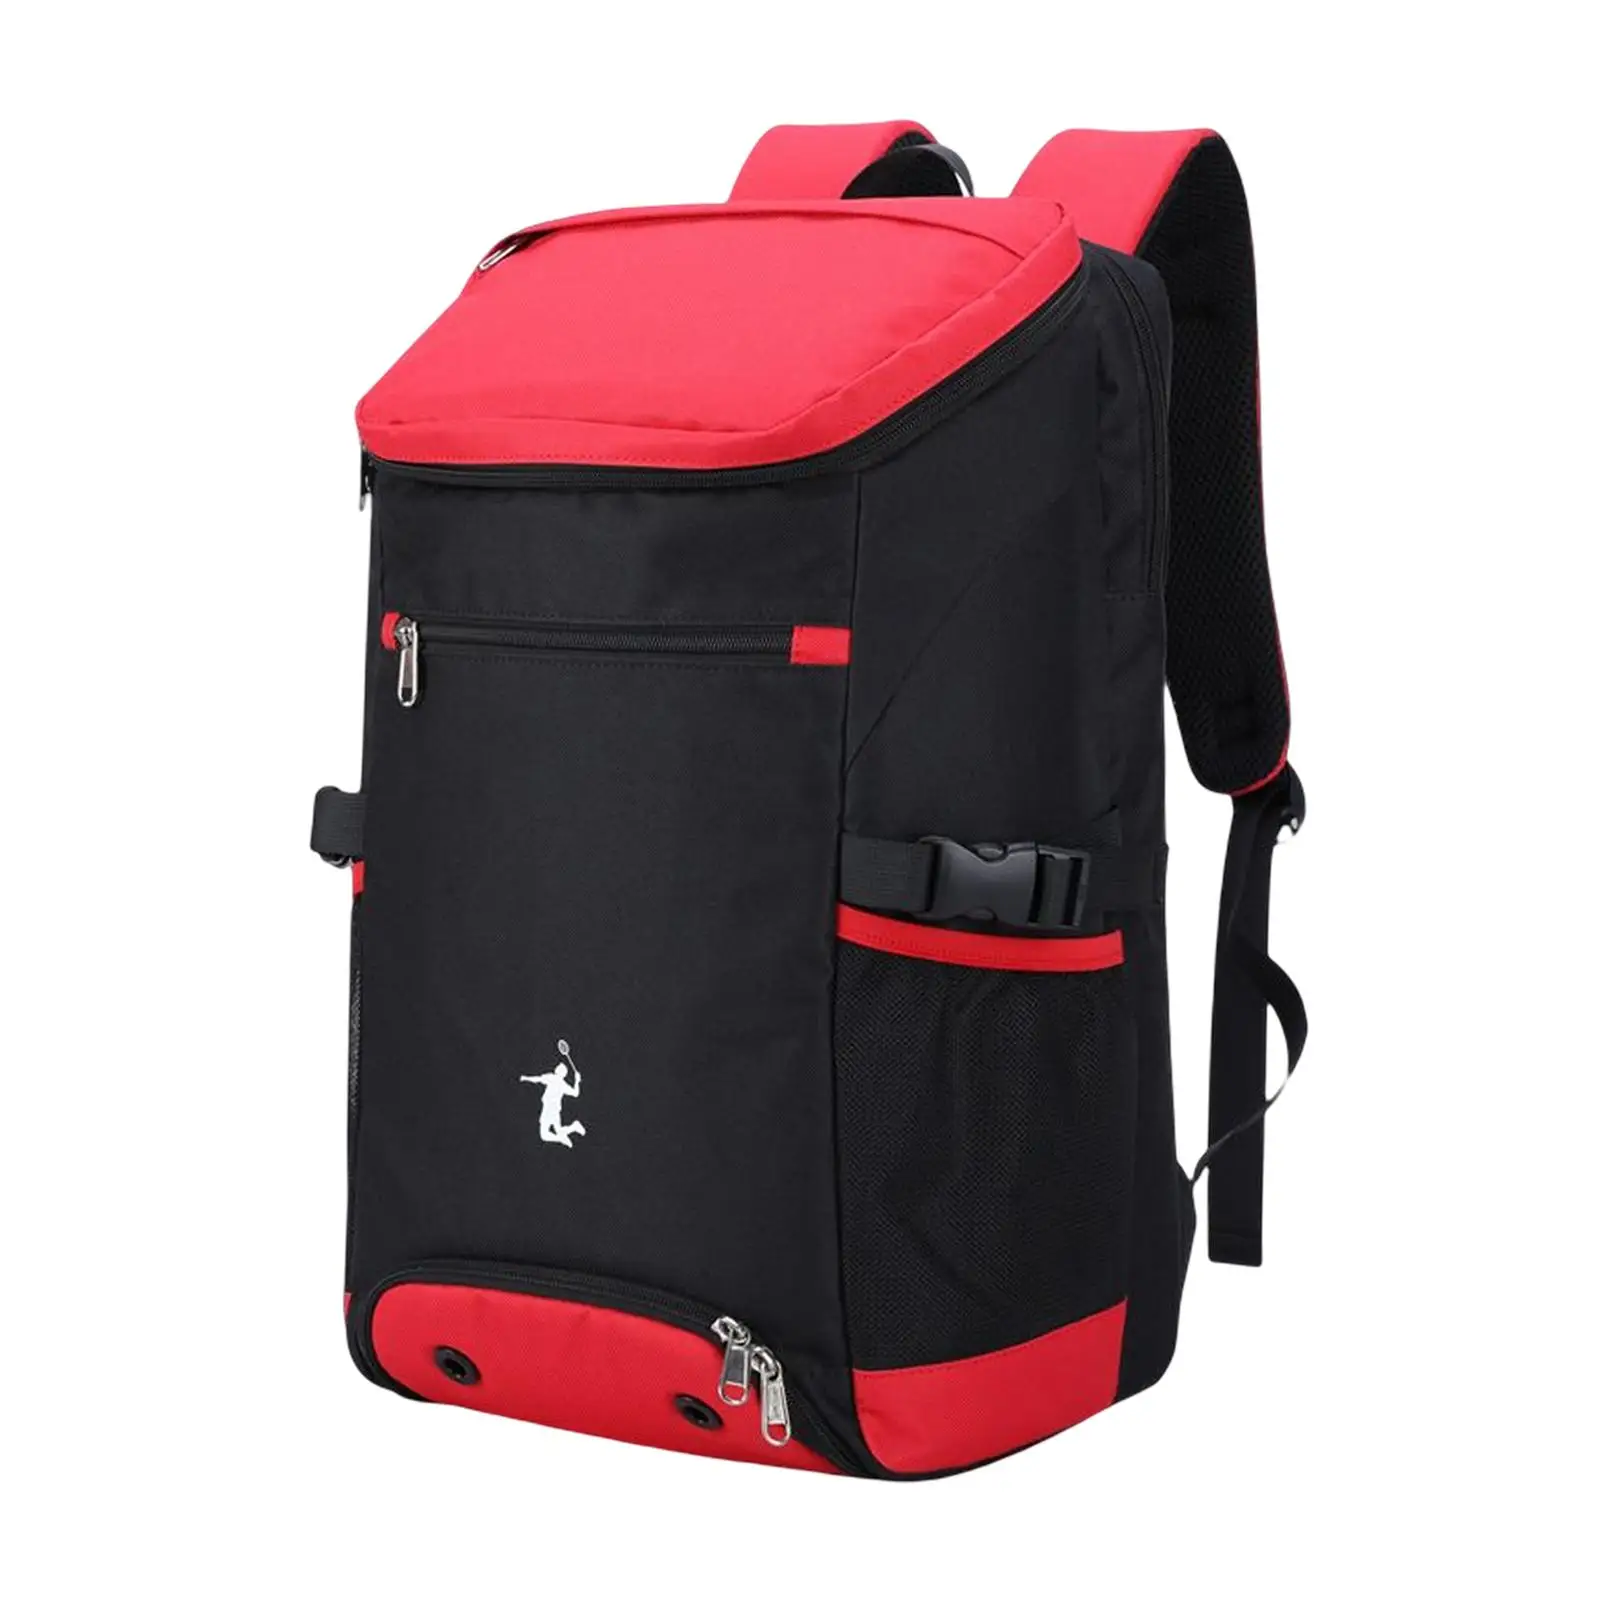 Large Tennis Backpack with Ventilated Shoe Compartment Outdoor Accessories Sports Durable Tennis Bag for Badminton Rackets